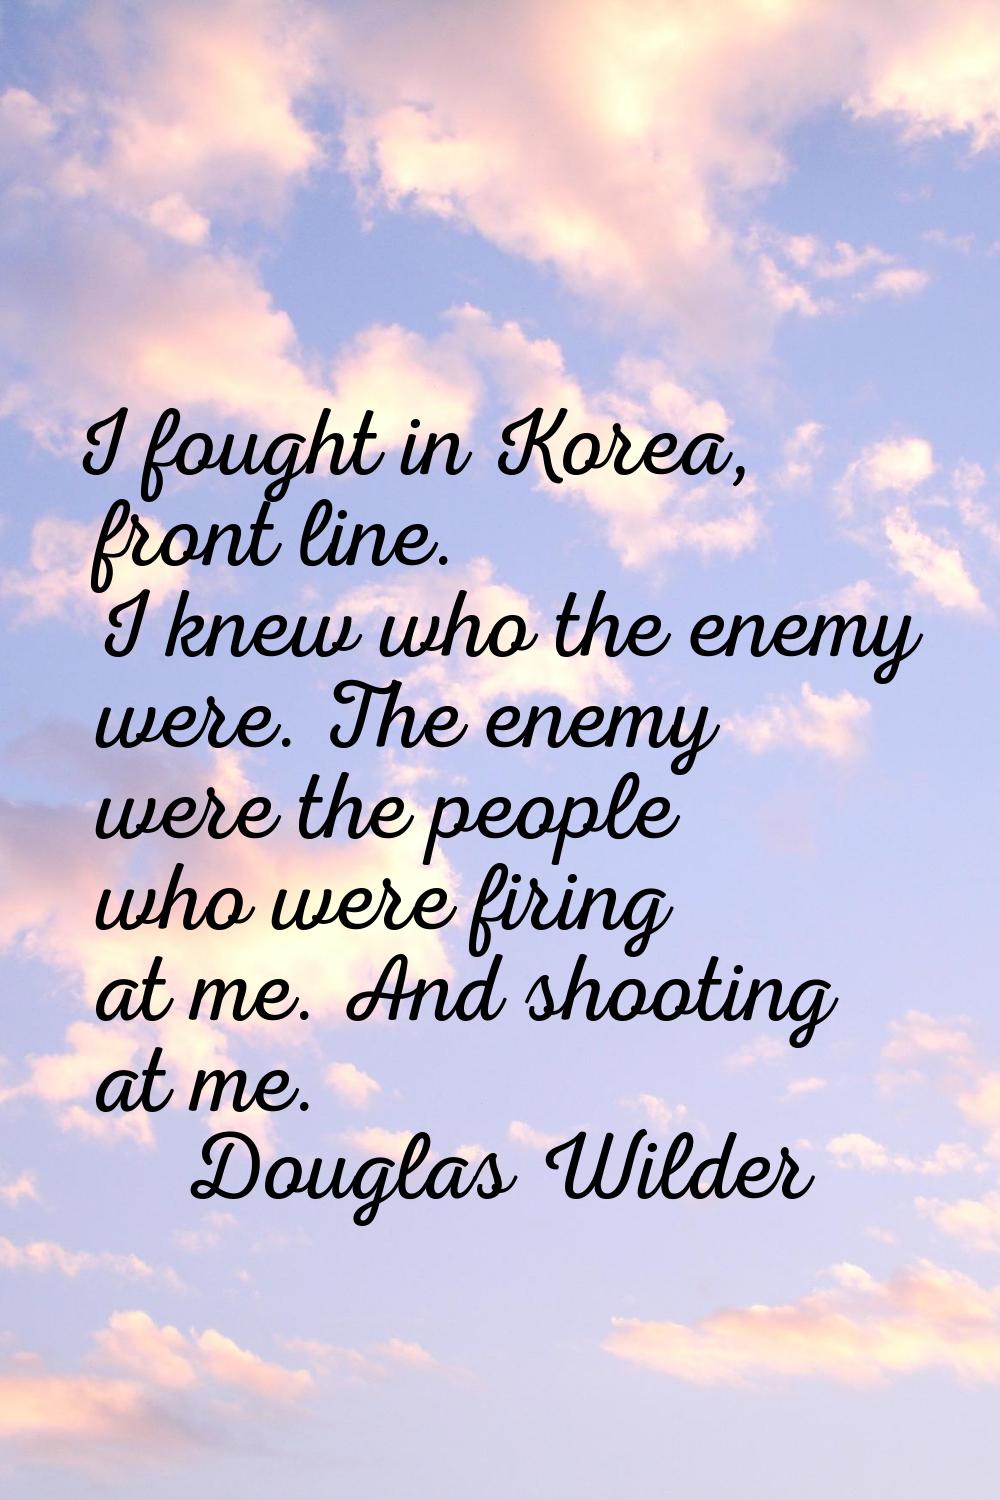 I fought in Korea, front line. I knew who the enemy were. The enemy were the people who were firing